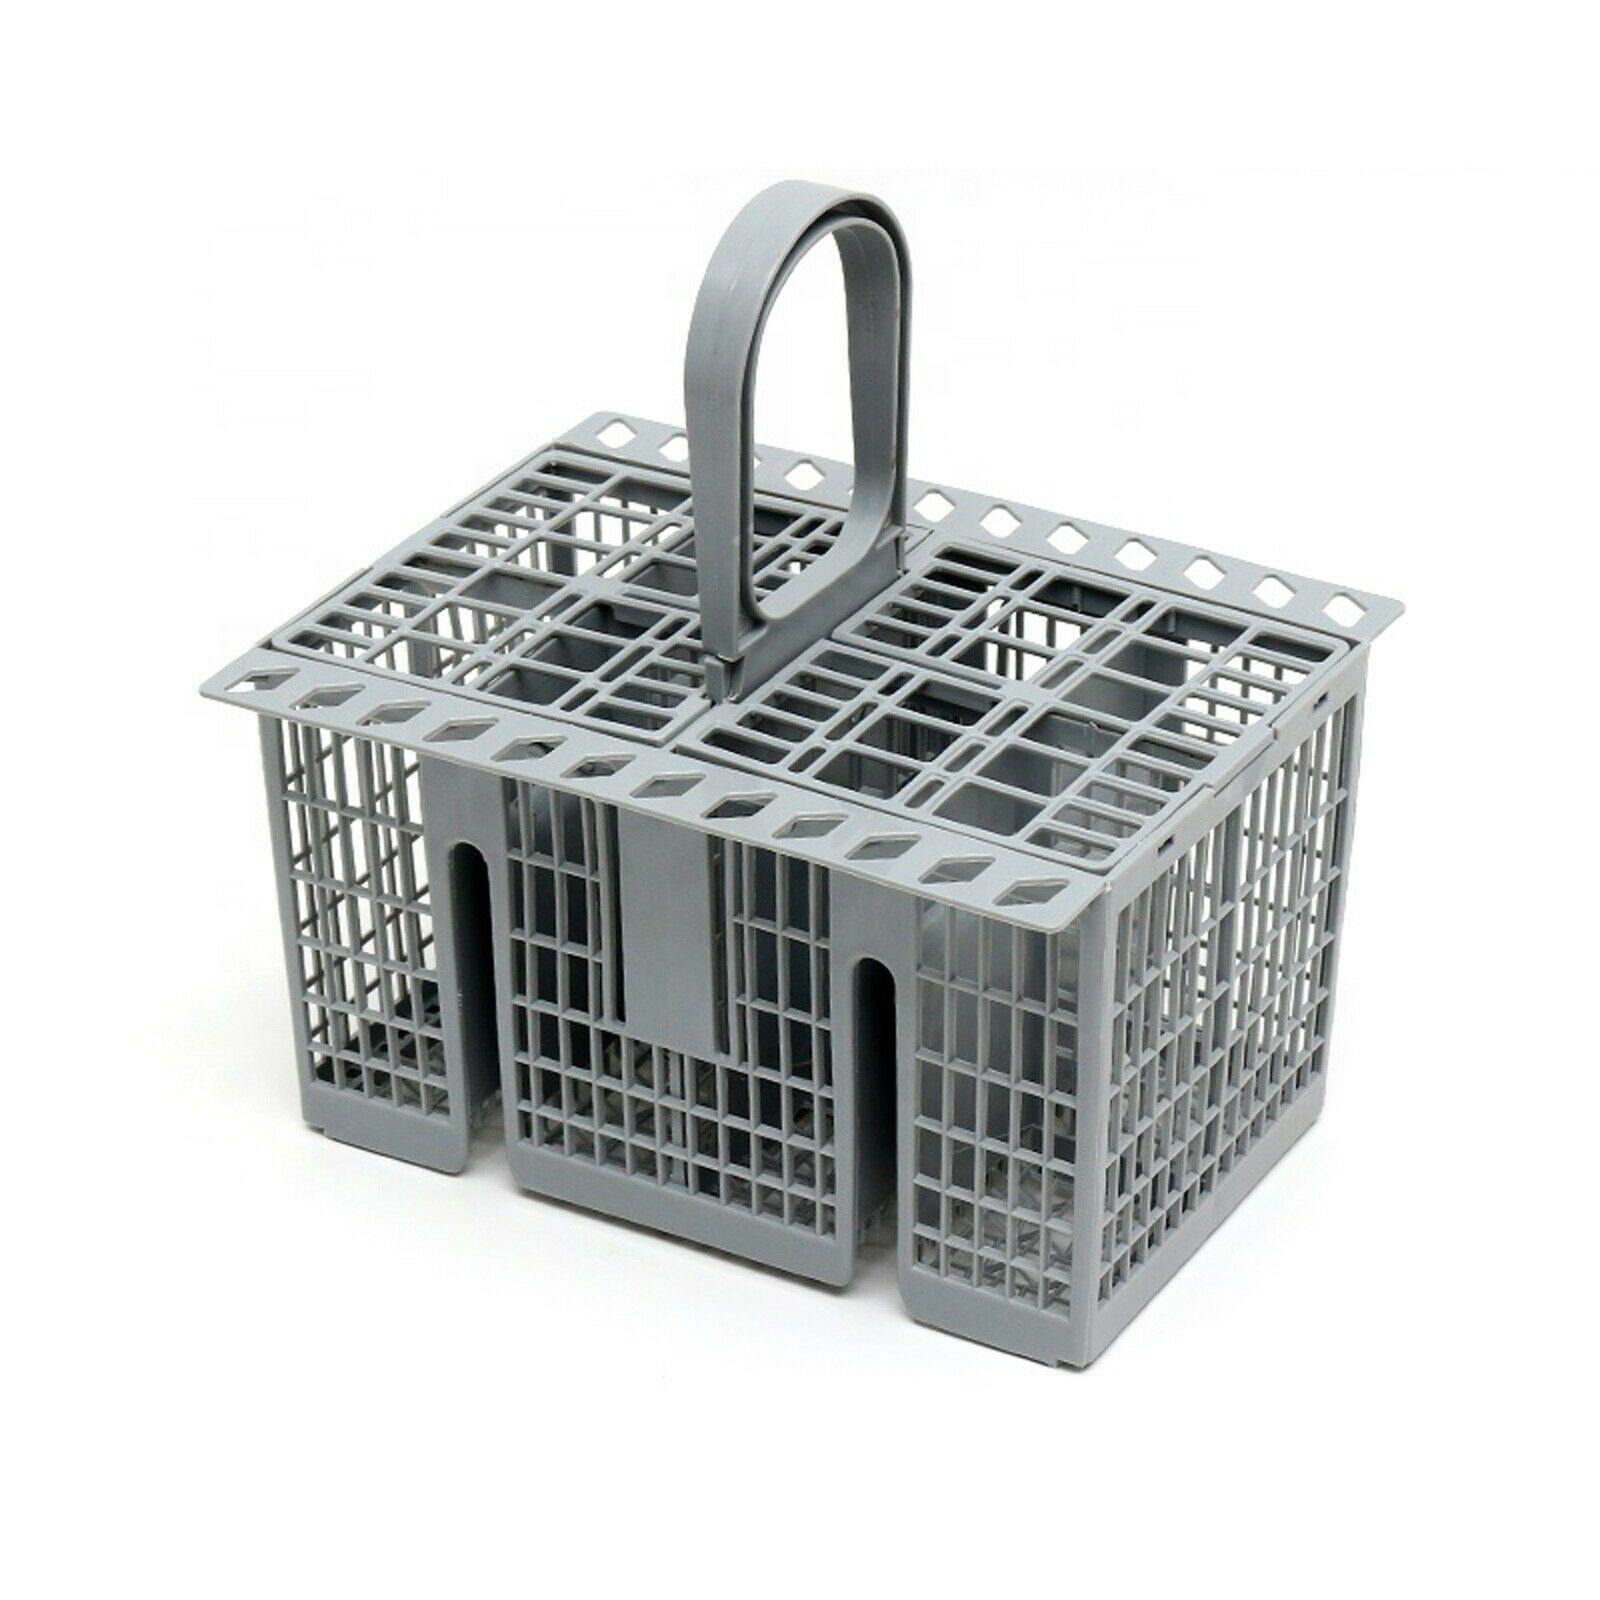 Dishwasher Cutlery Basket Cage with handle For Bosch 668270 11018806 00418280 Sparesbarn